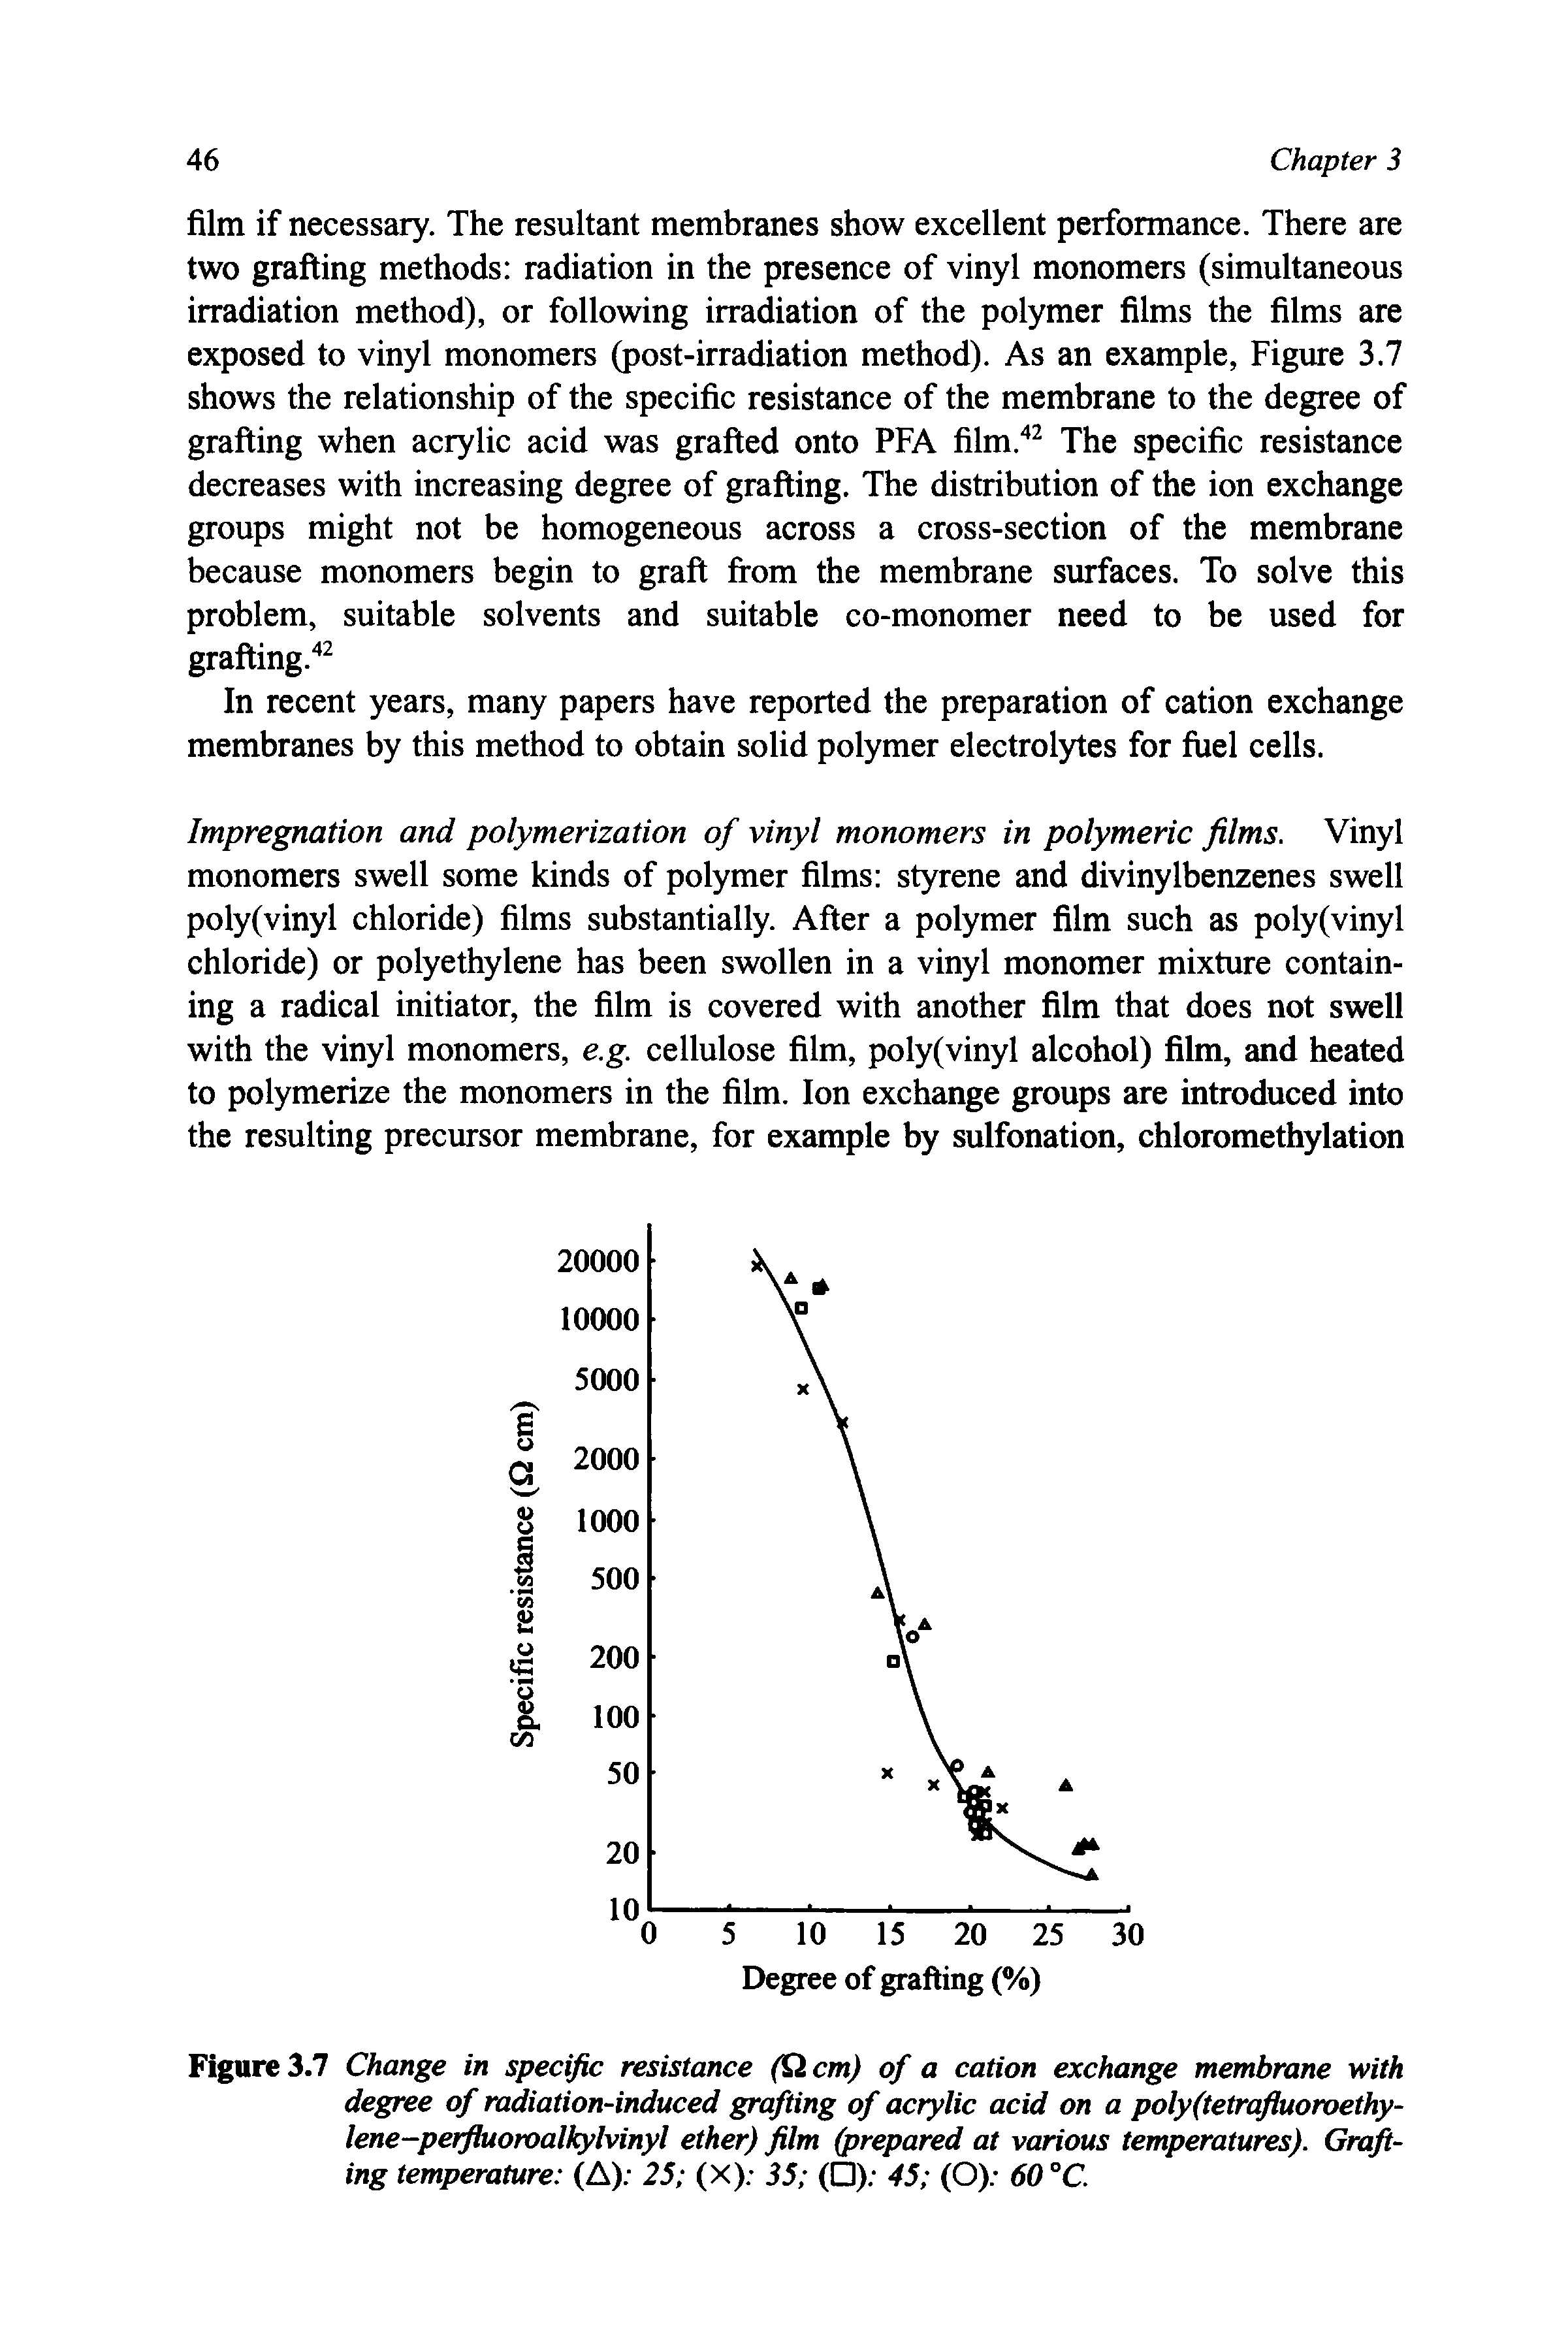 Figure 3.7 Change in specific resistance (Qcm) of a cation exchange membrane with degree of radiation-induced grafting of acrylic acid on a poly(tetrafiuoroethy-lene-perfiuoroalkylvinyl ether) film (prepared at various temperatures). Grafting temperature (A) 25 (X) 35 ( ) 45 (O) 60 °C.